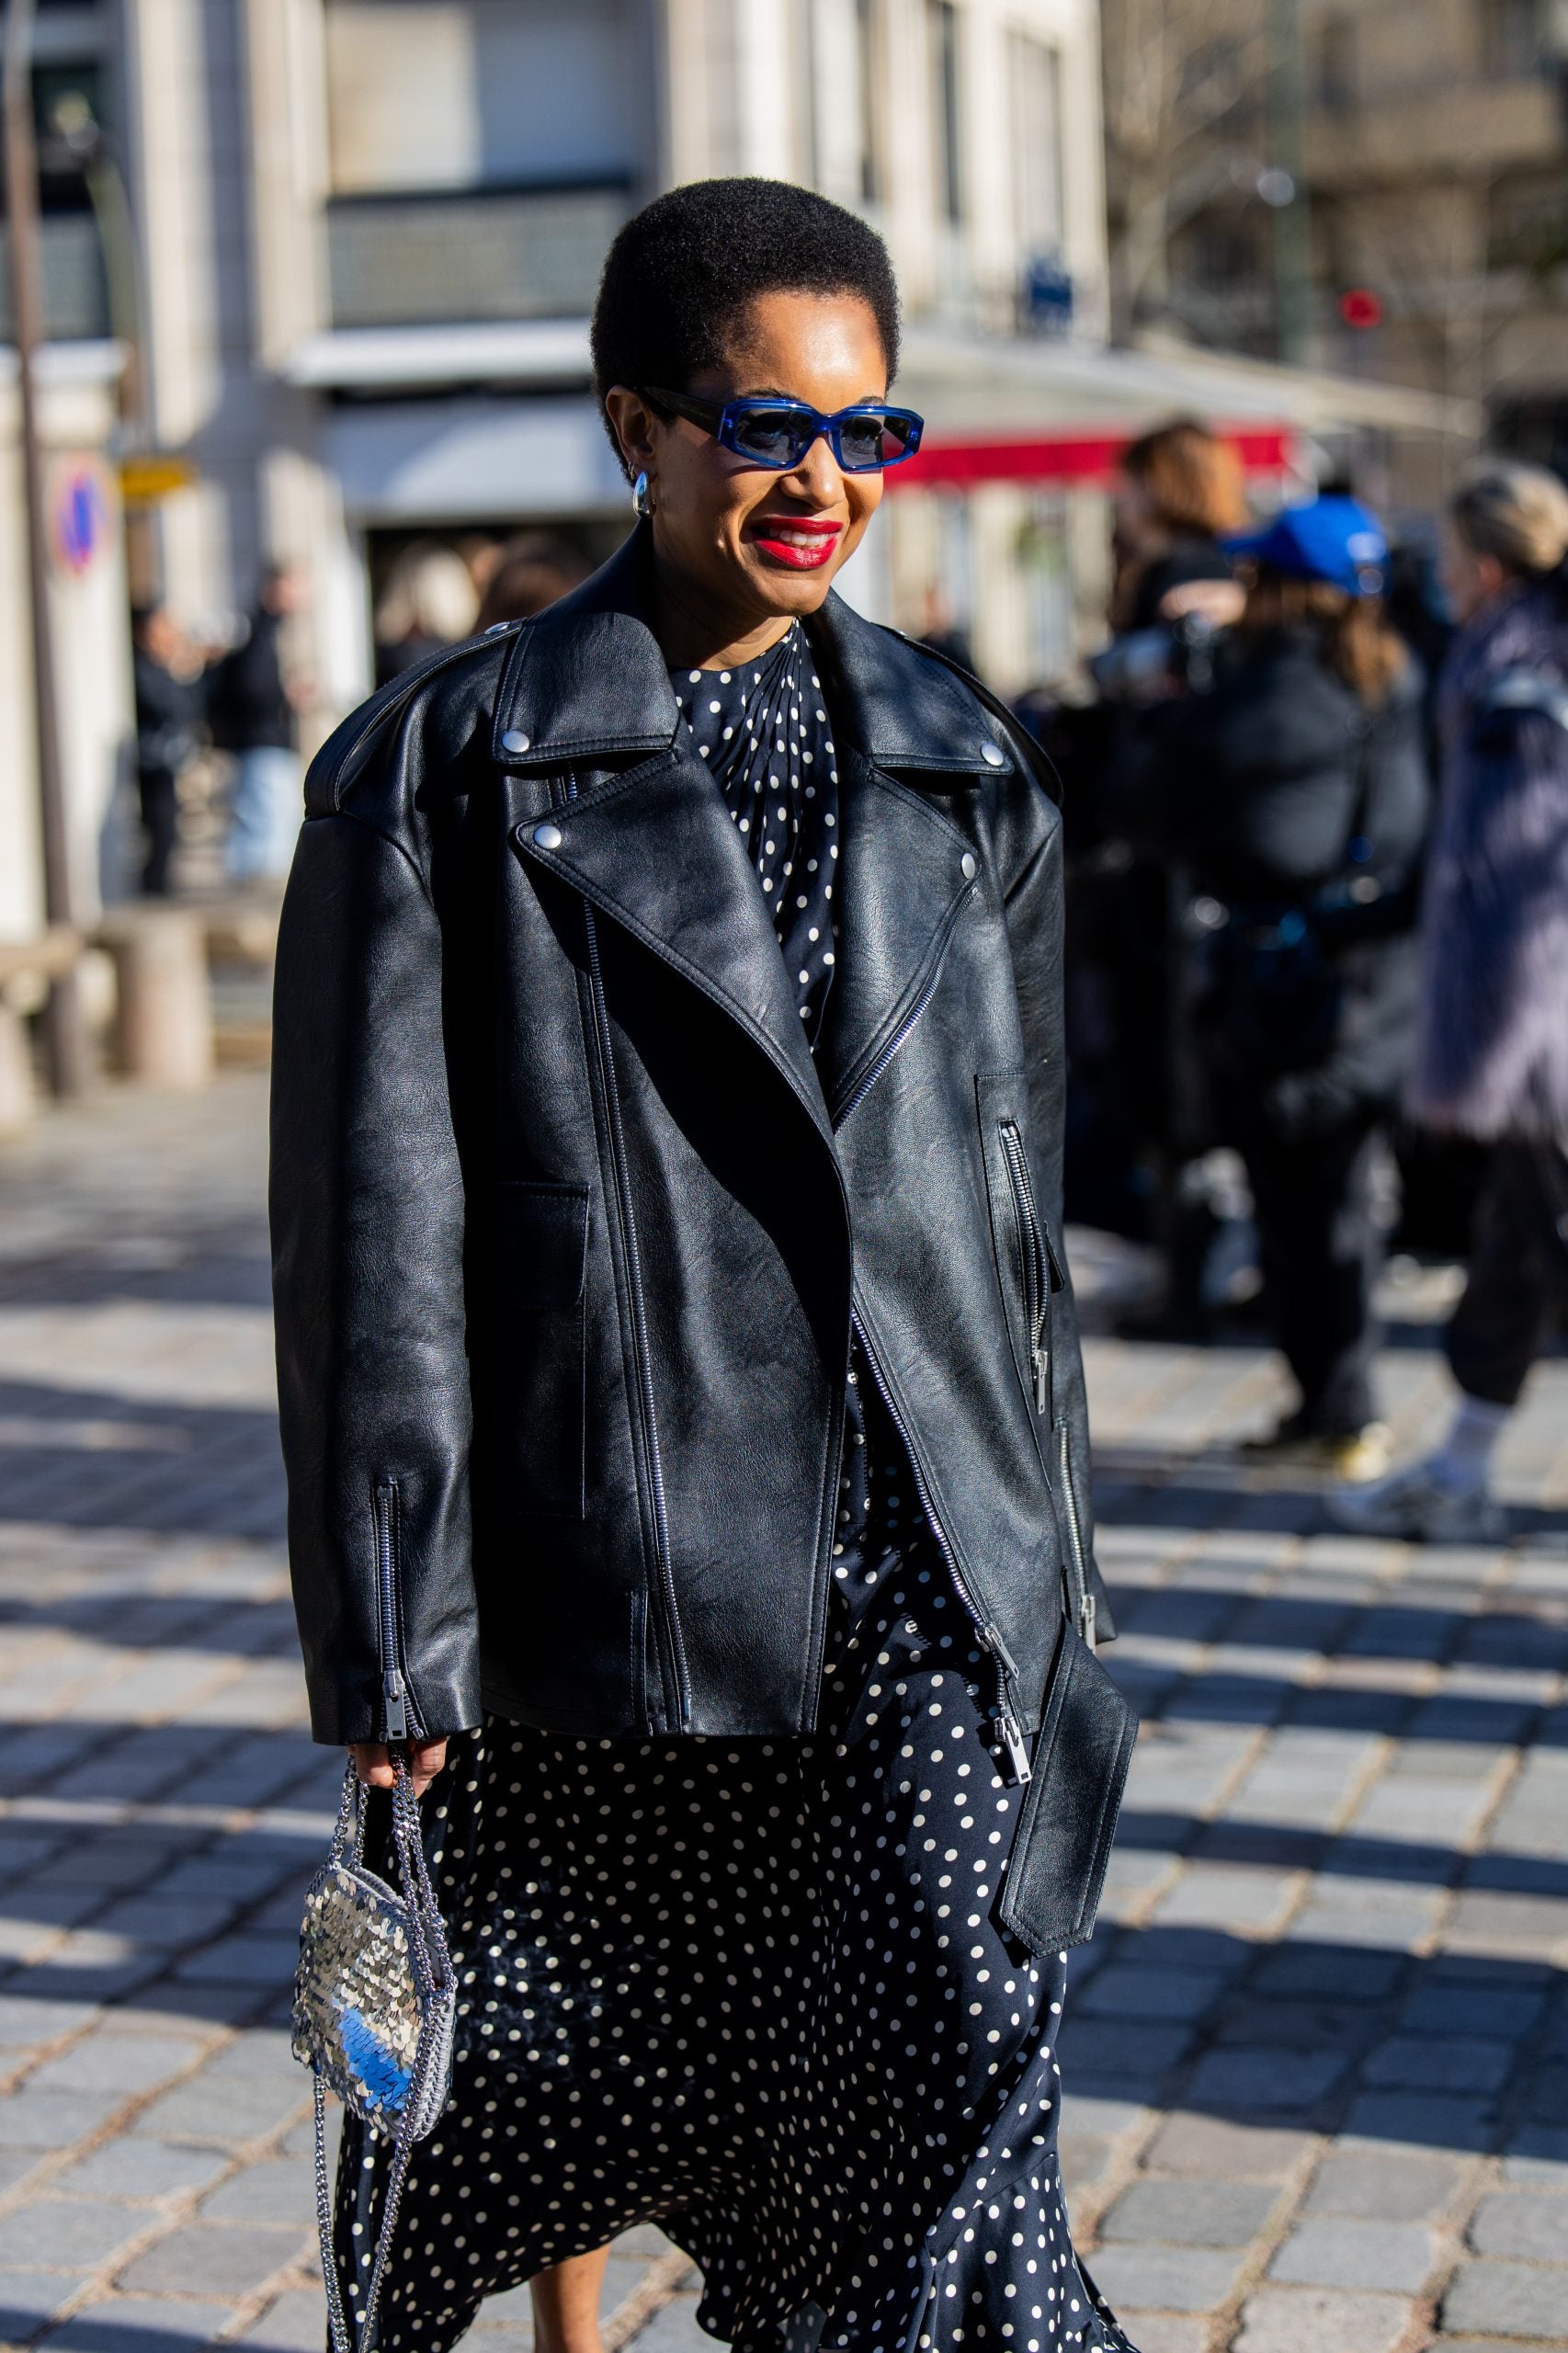 The Best Street Style Looks From Paris Fashion Week | Essence